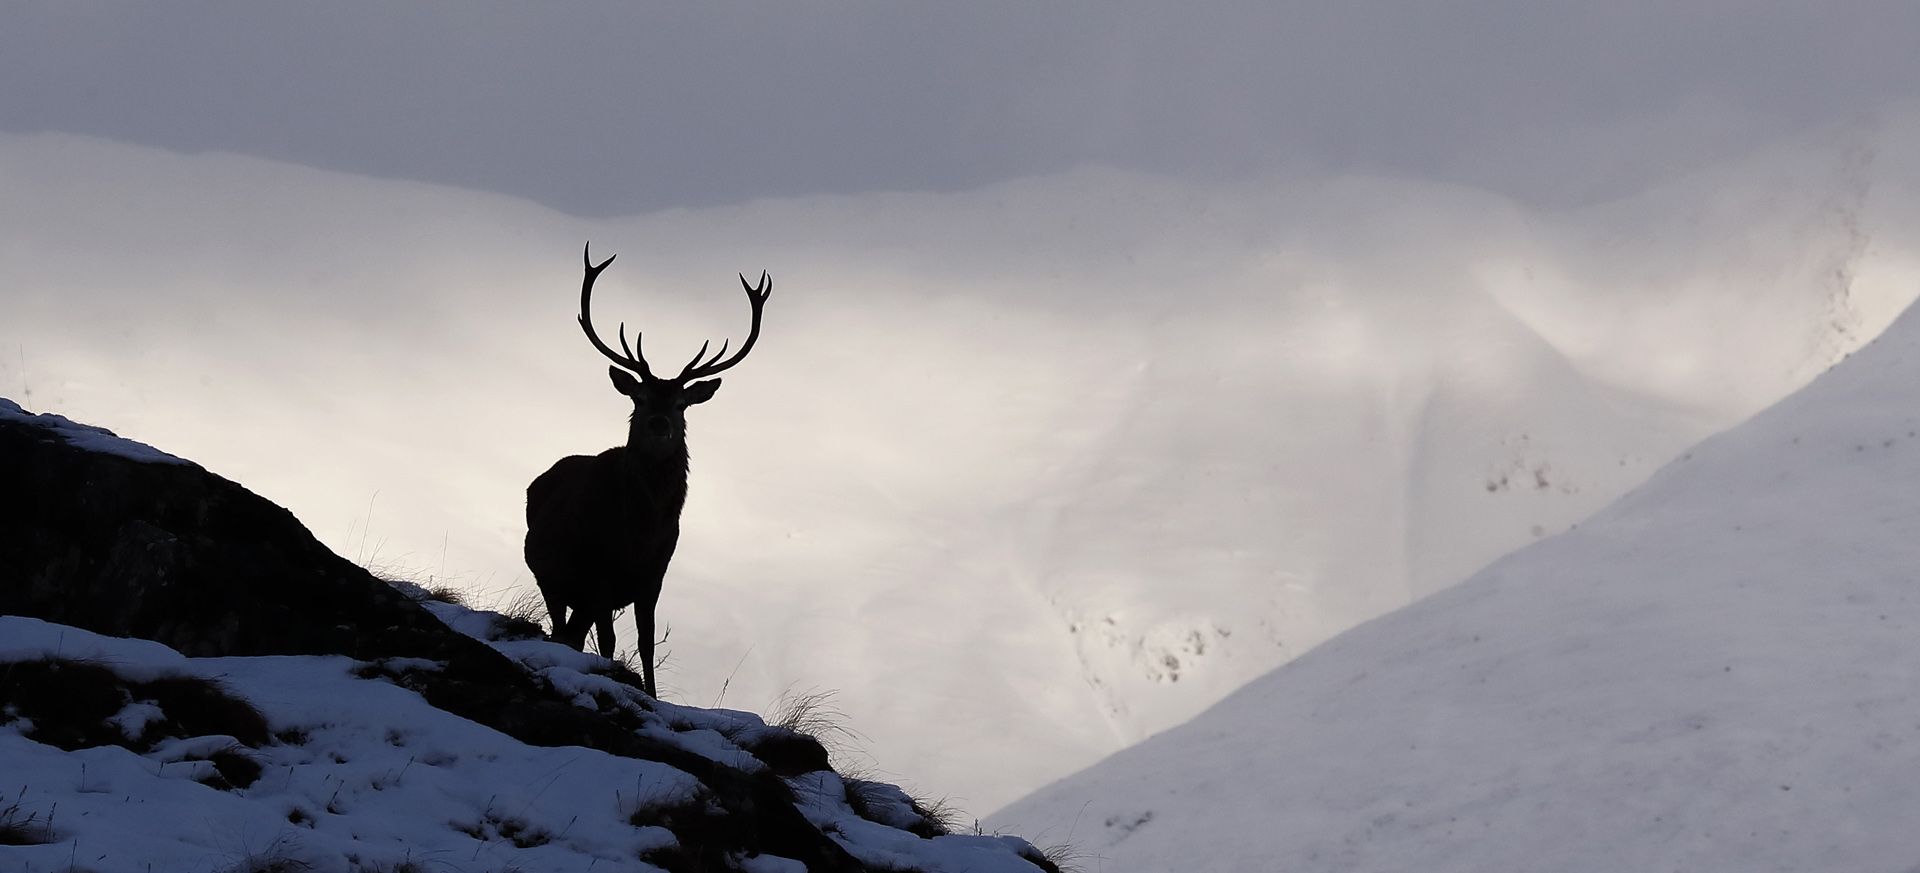 Red deer stag in winter mountains